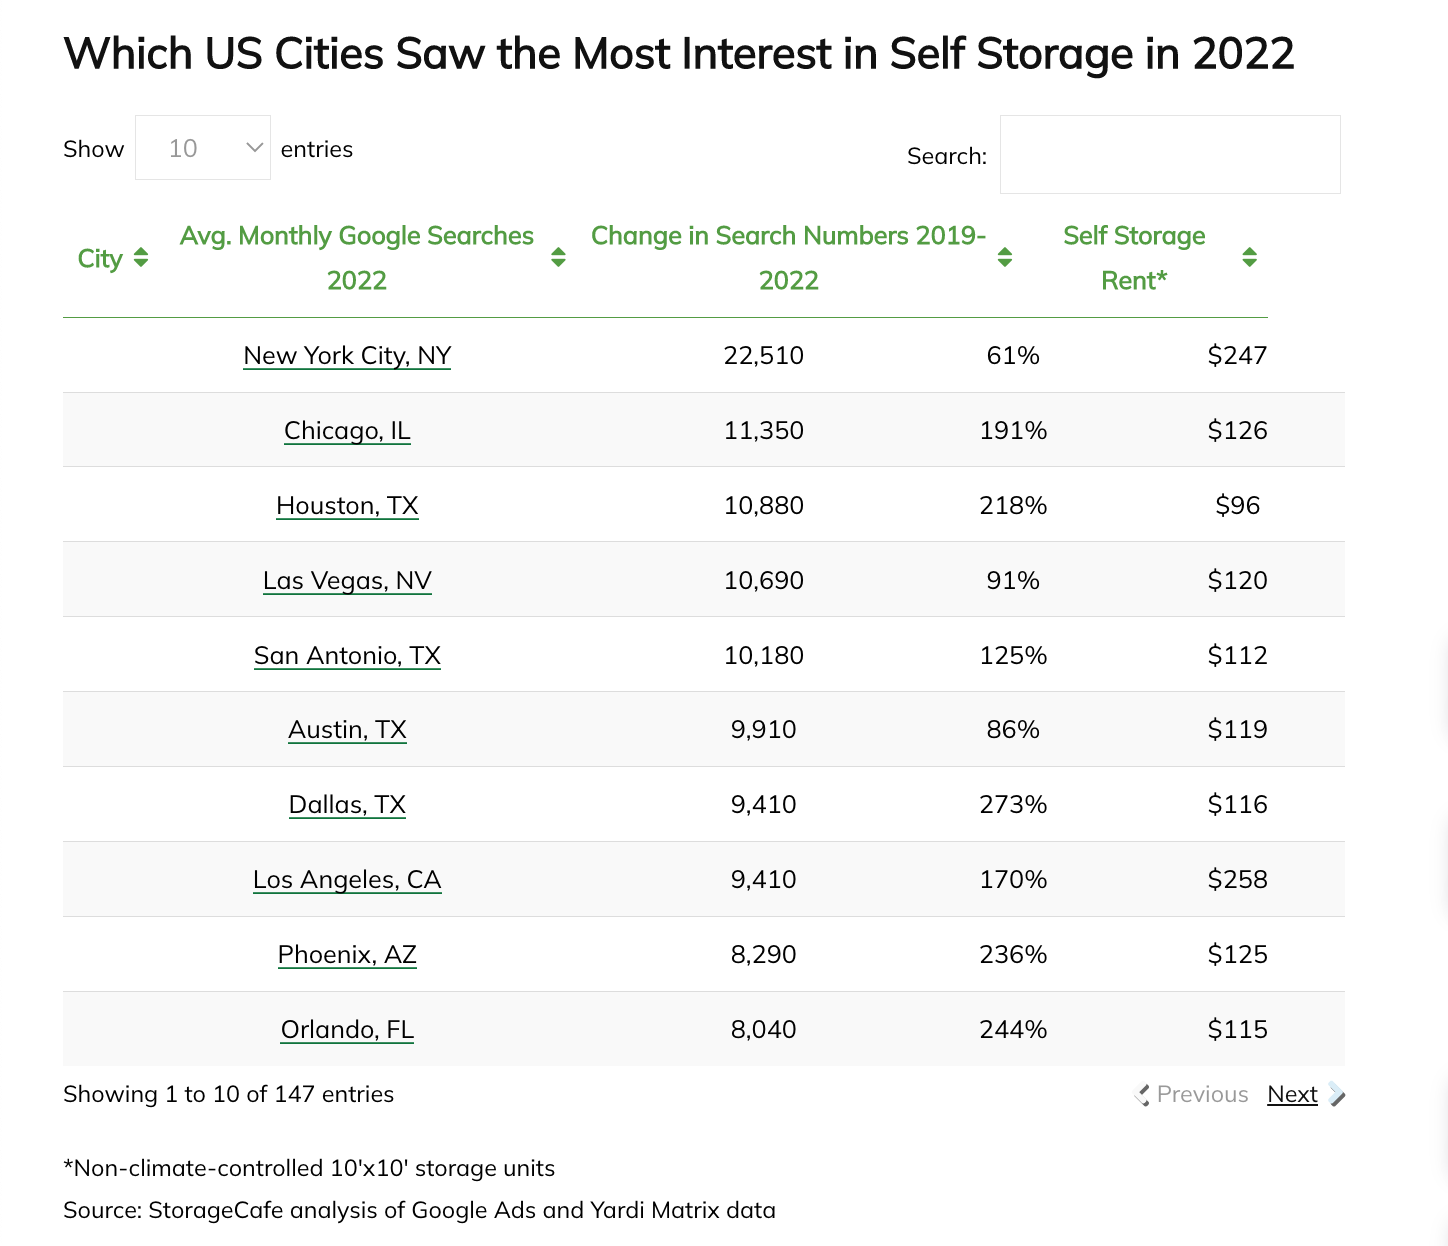 Which U.S. cities saw the most interest in self storage via Google searches, in 2022